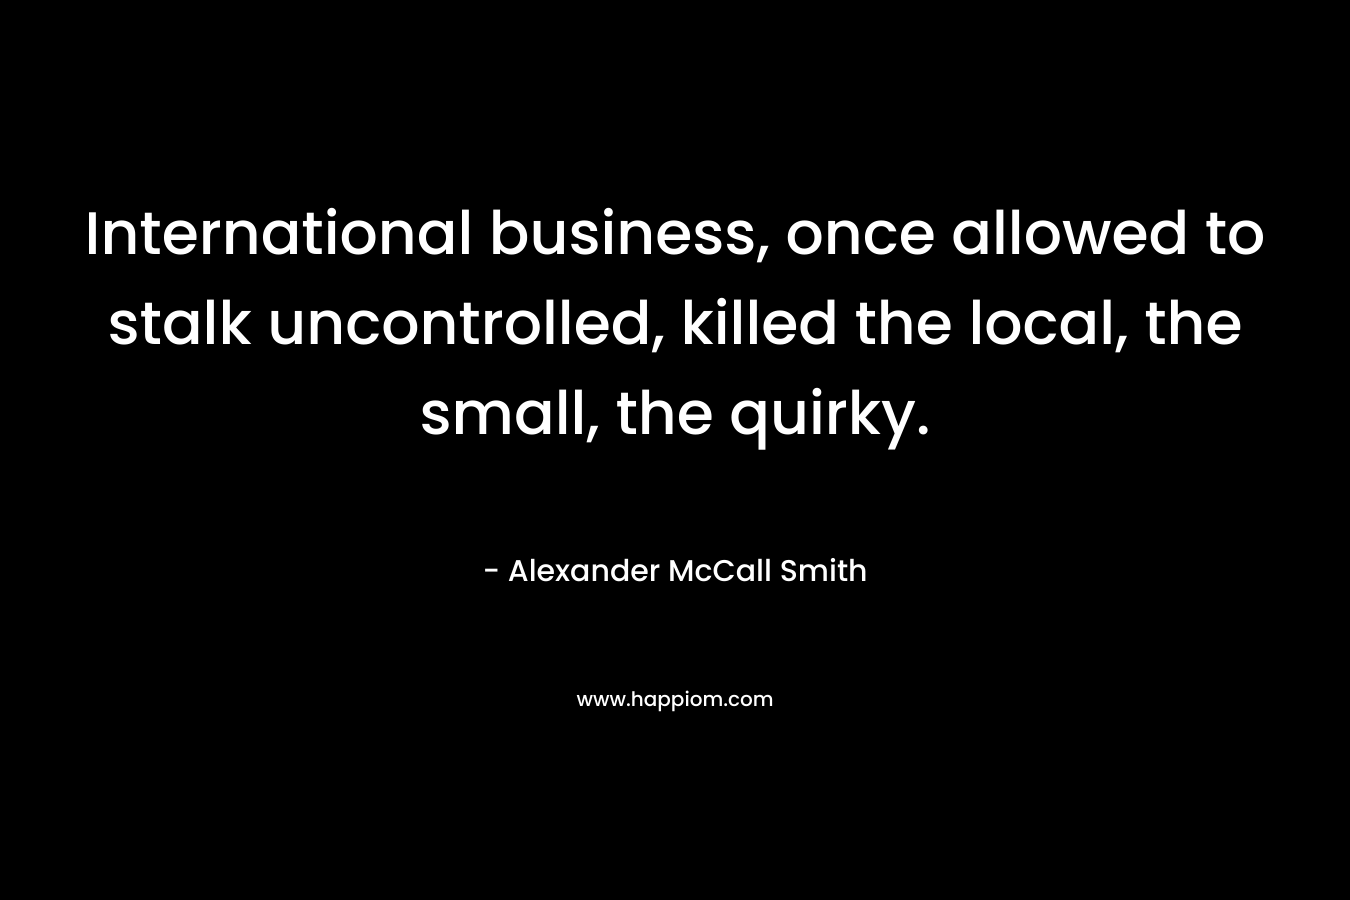 International business, once allowed to stalk uncontrolled, killed the local, the small, the quirky. – Alexander McCall Smith